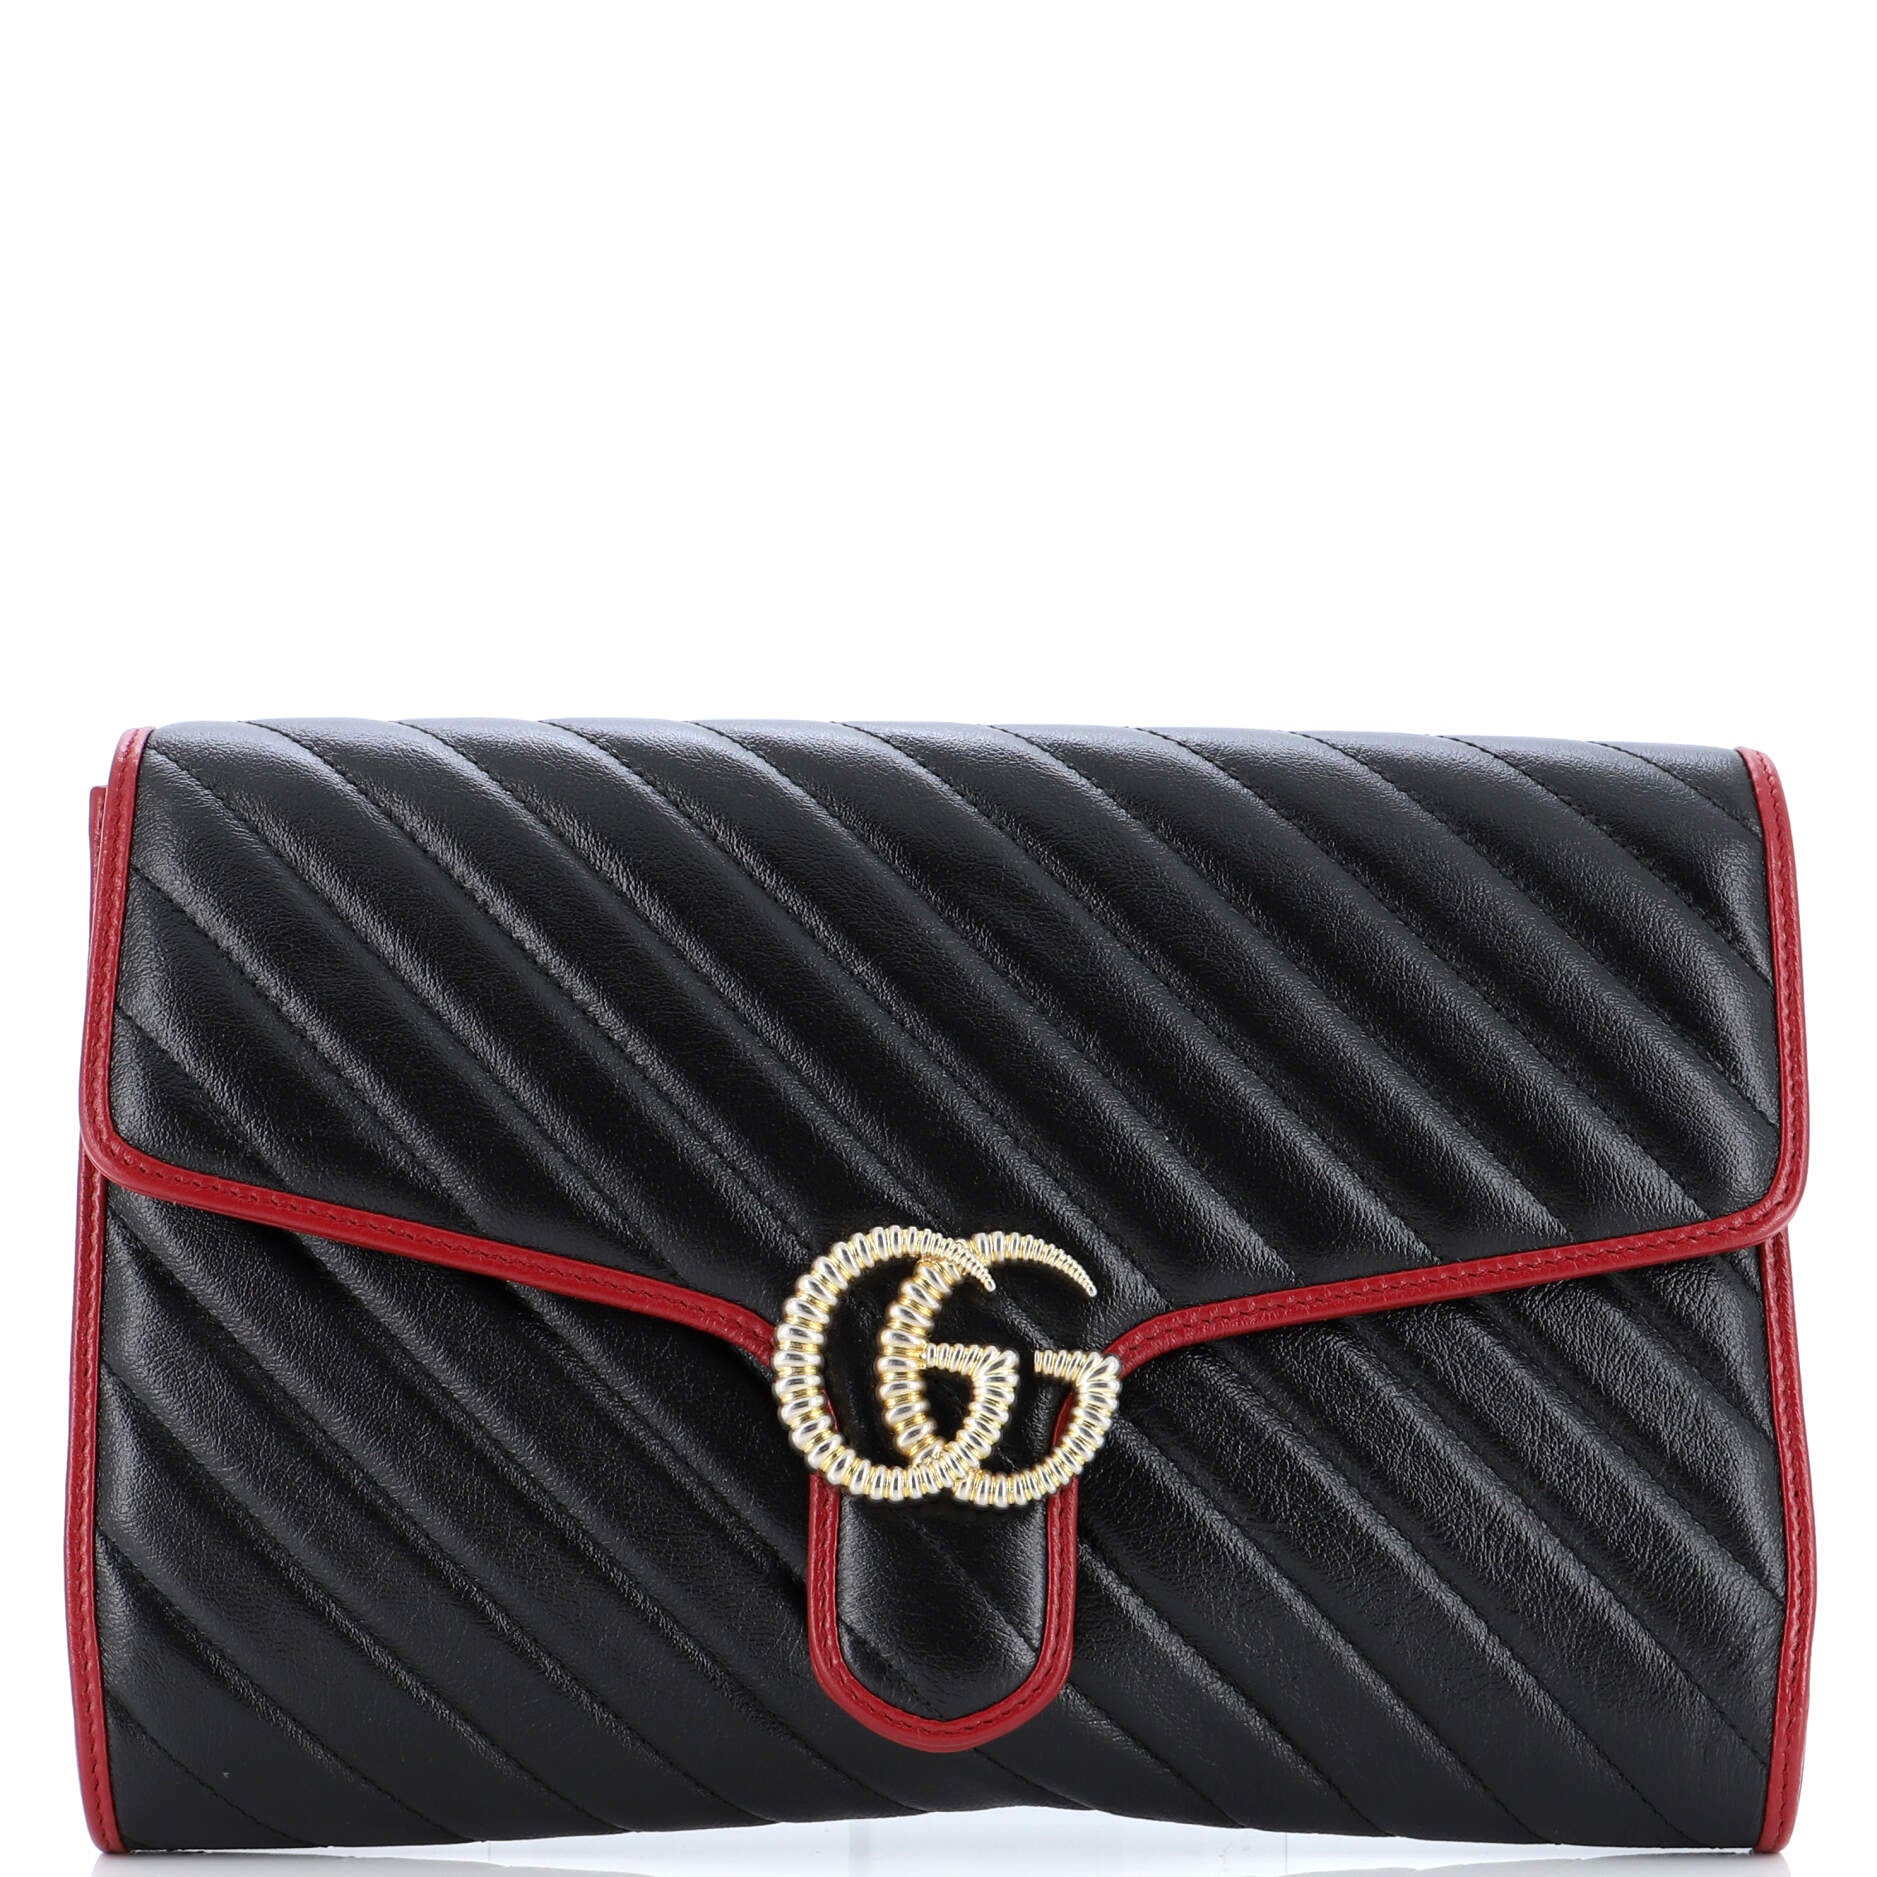 GG Marmont Flap Clutch Matelasse Leather